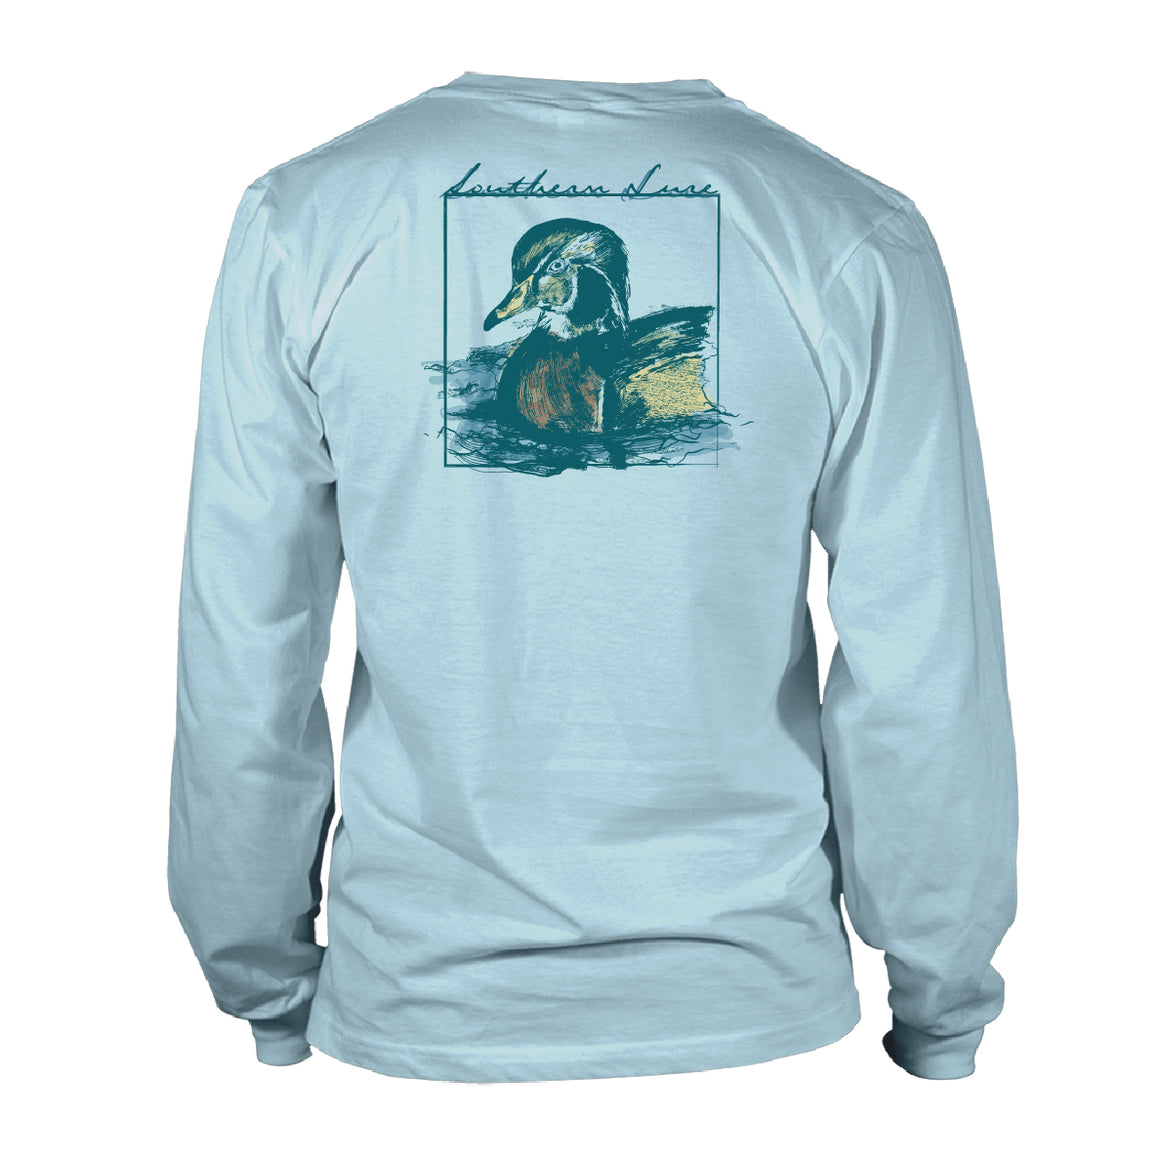 Youth & Toddler Long Sleeve Tee Wood Duck - Sky Blue